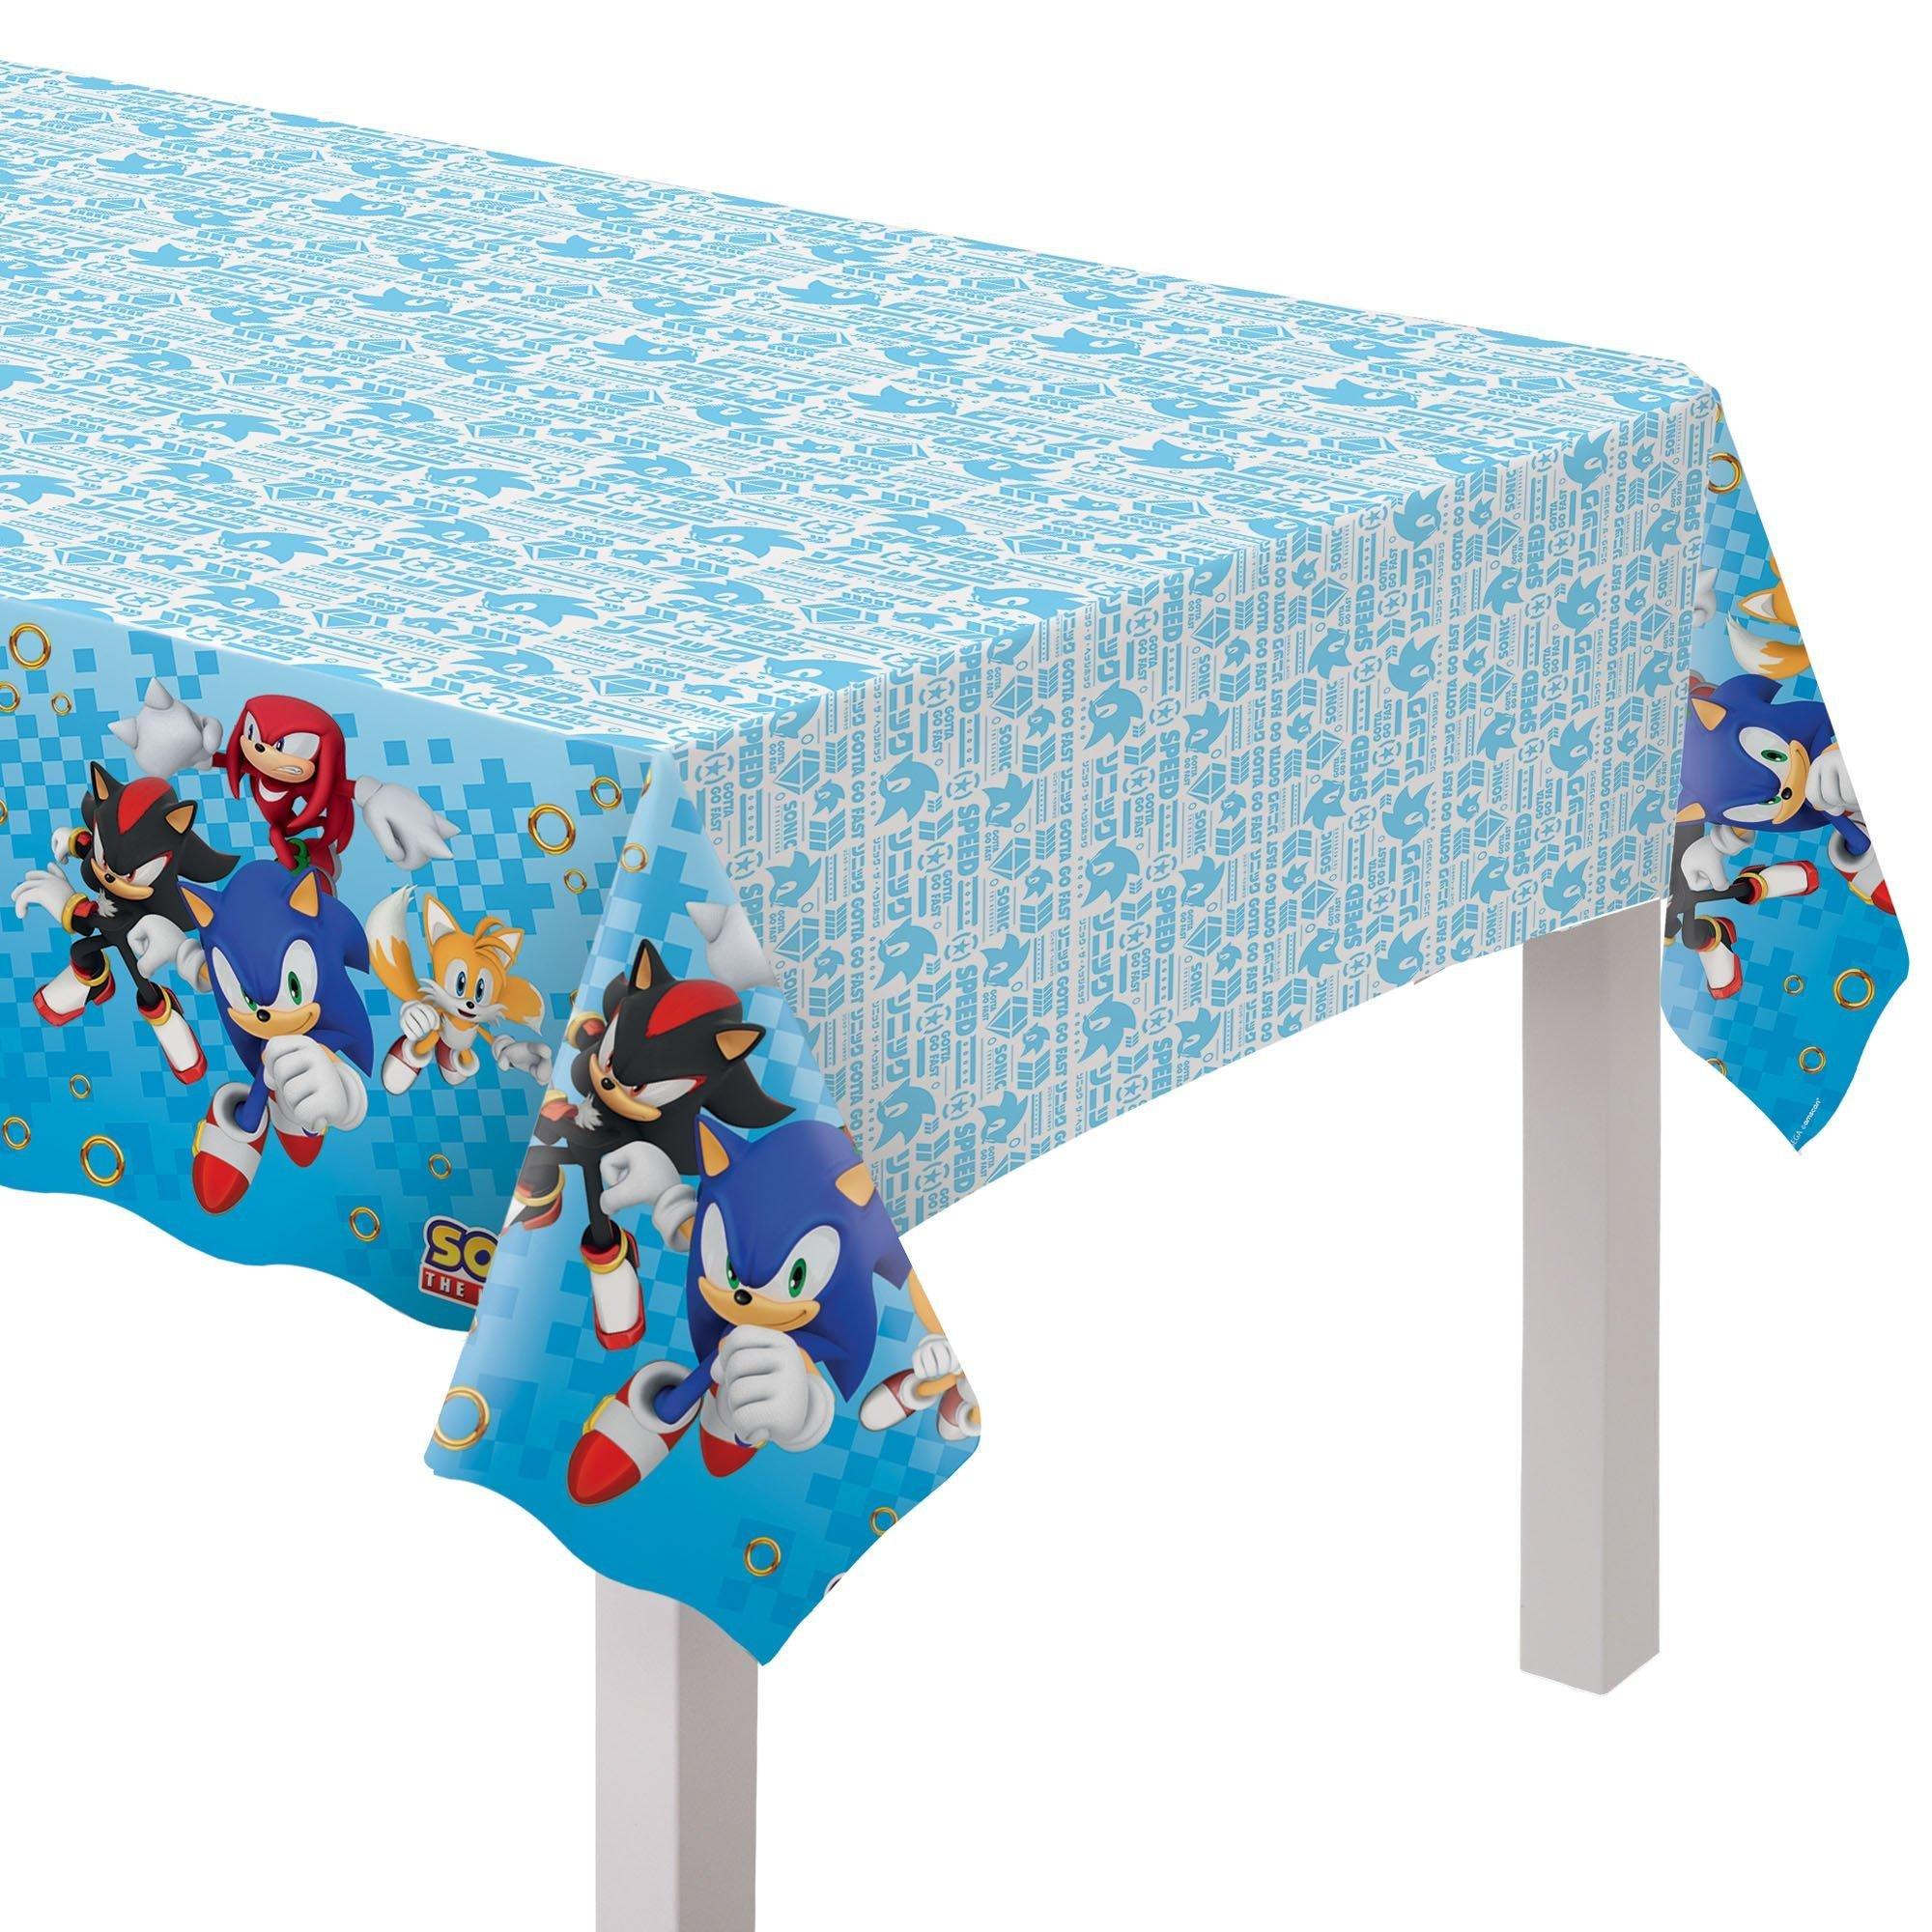 Sonic the Hedgehog Party Supplies Pack for 8 Guests - Kit Includes Plates, Napkins & Table Cover